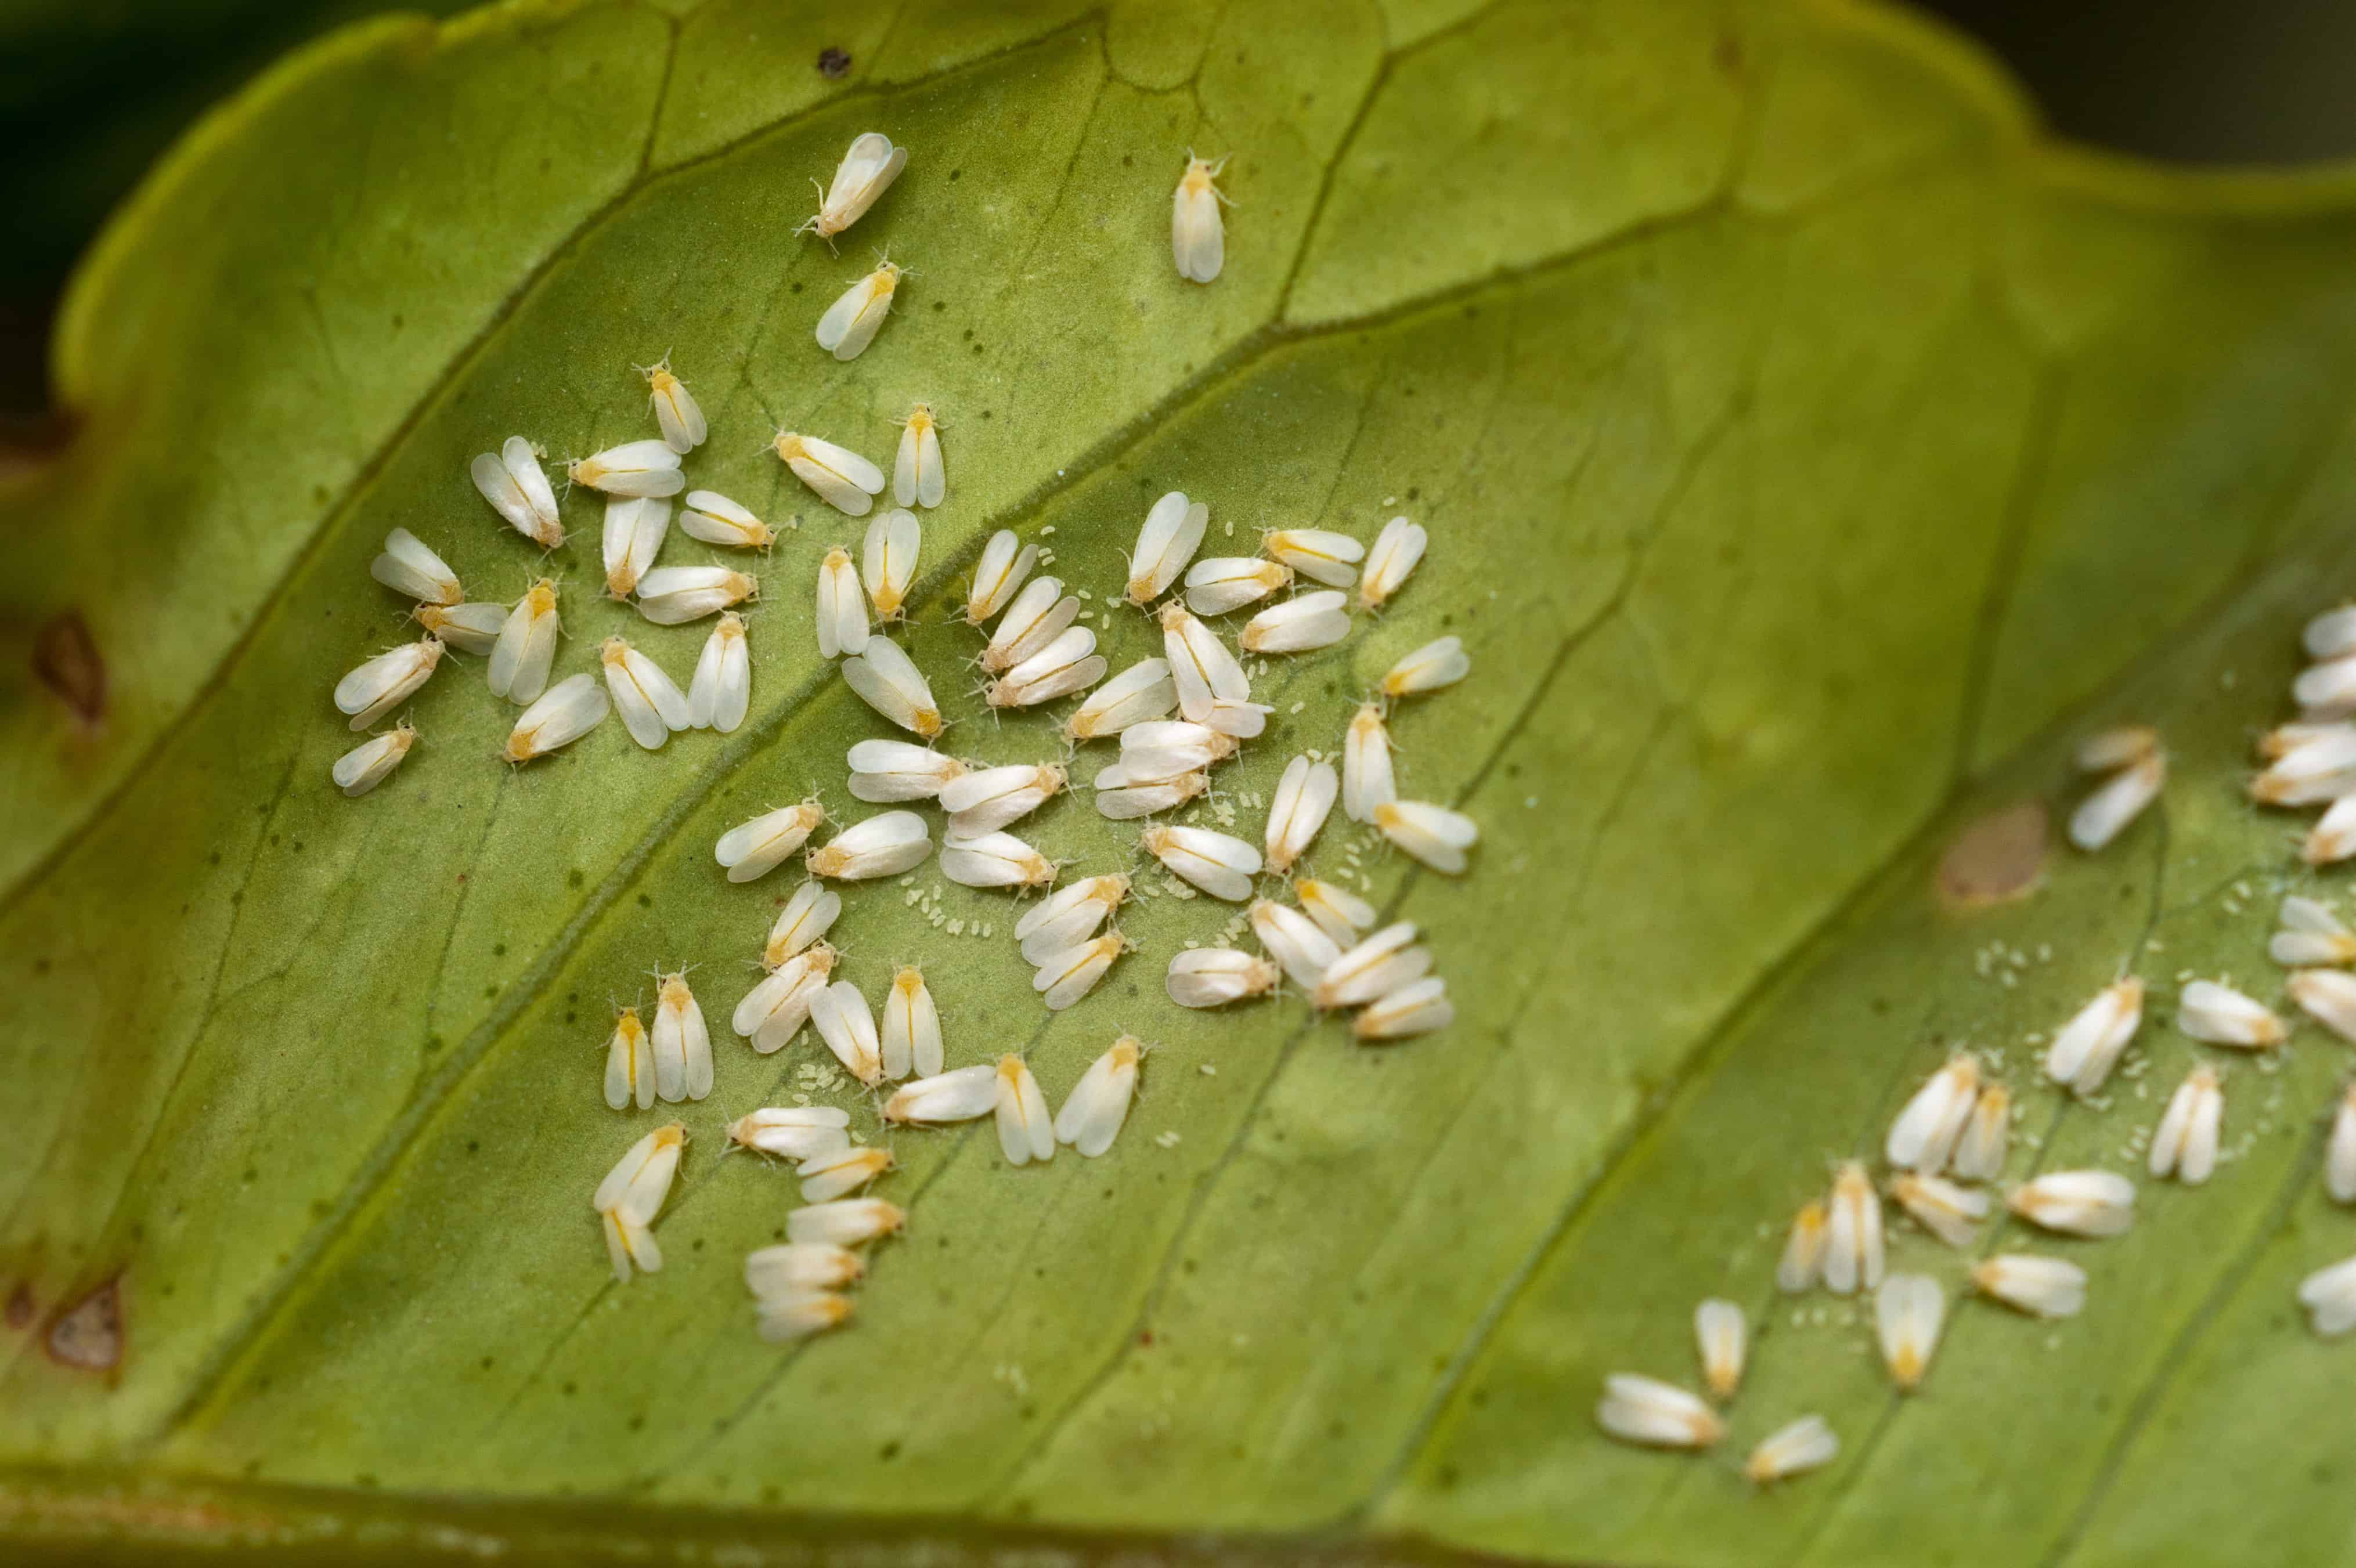 Whiteflies laying eggs underneath a leaf